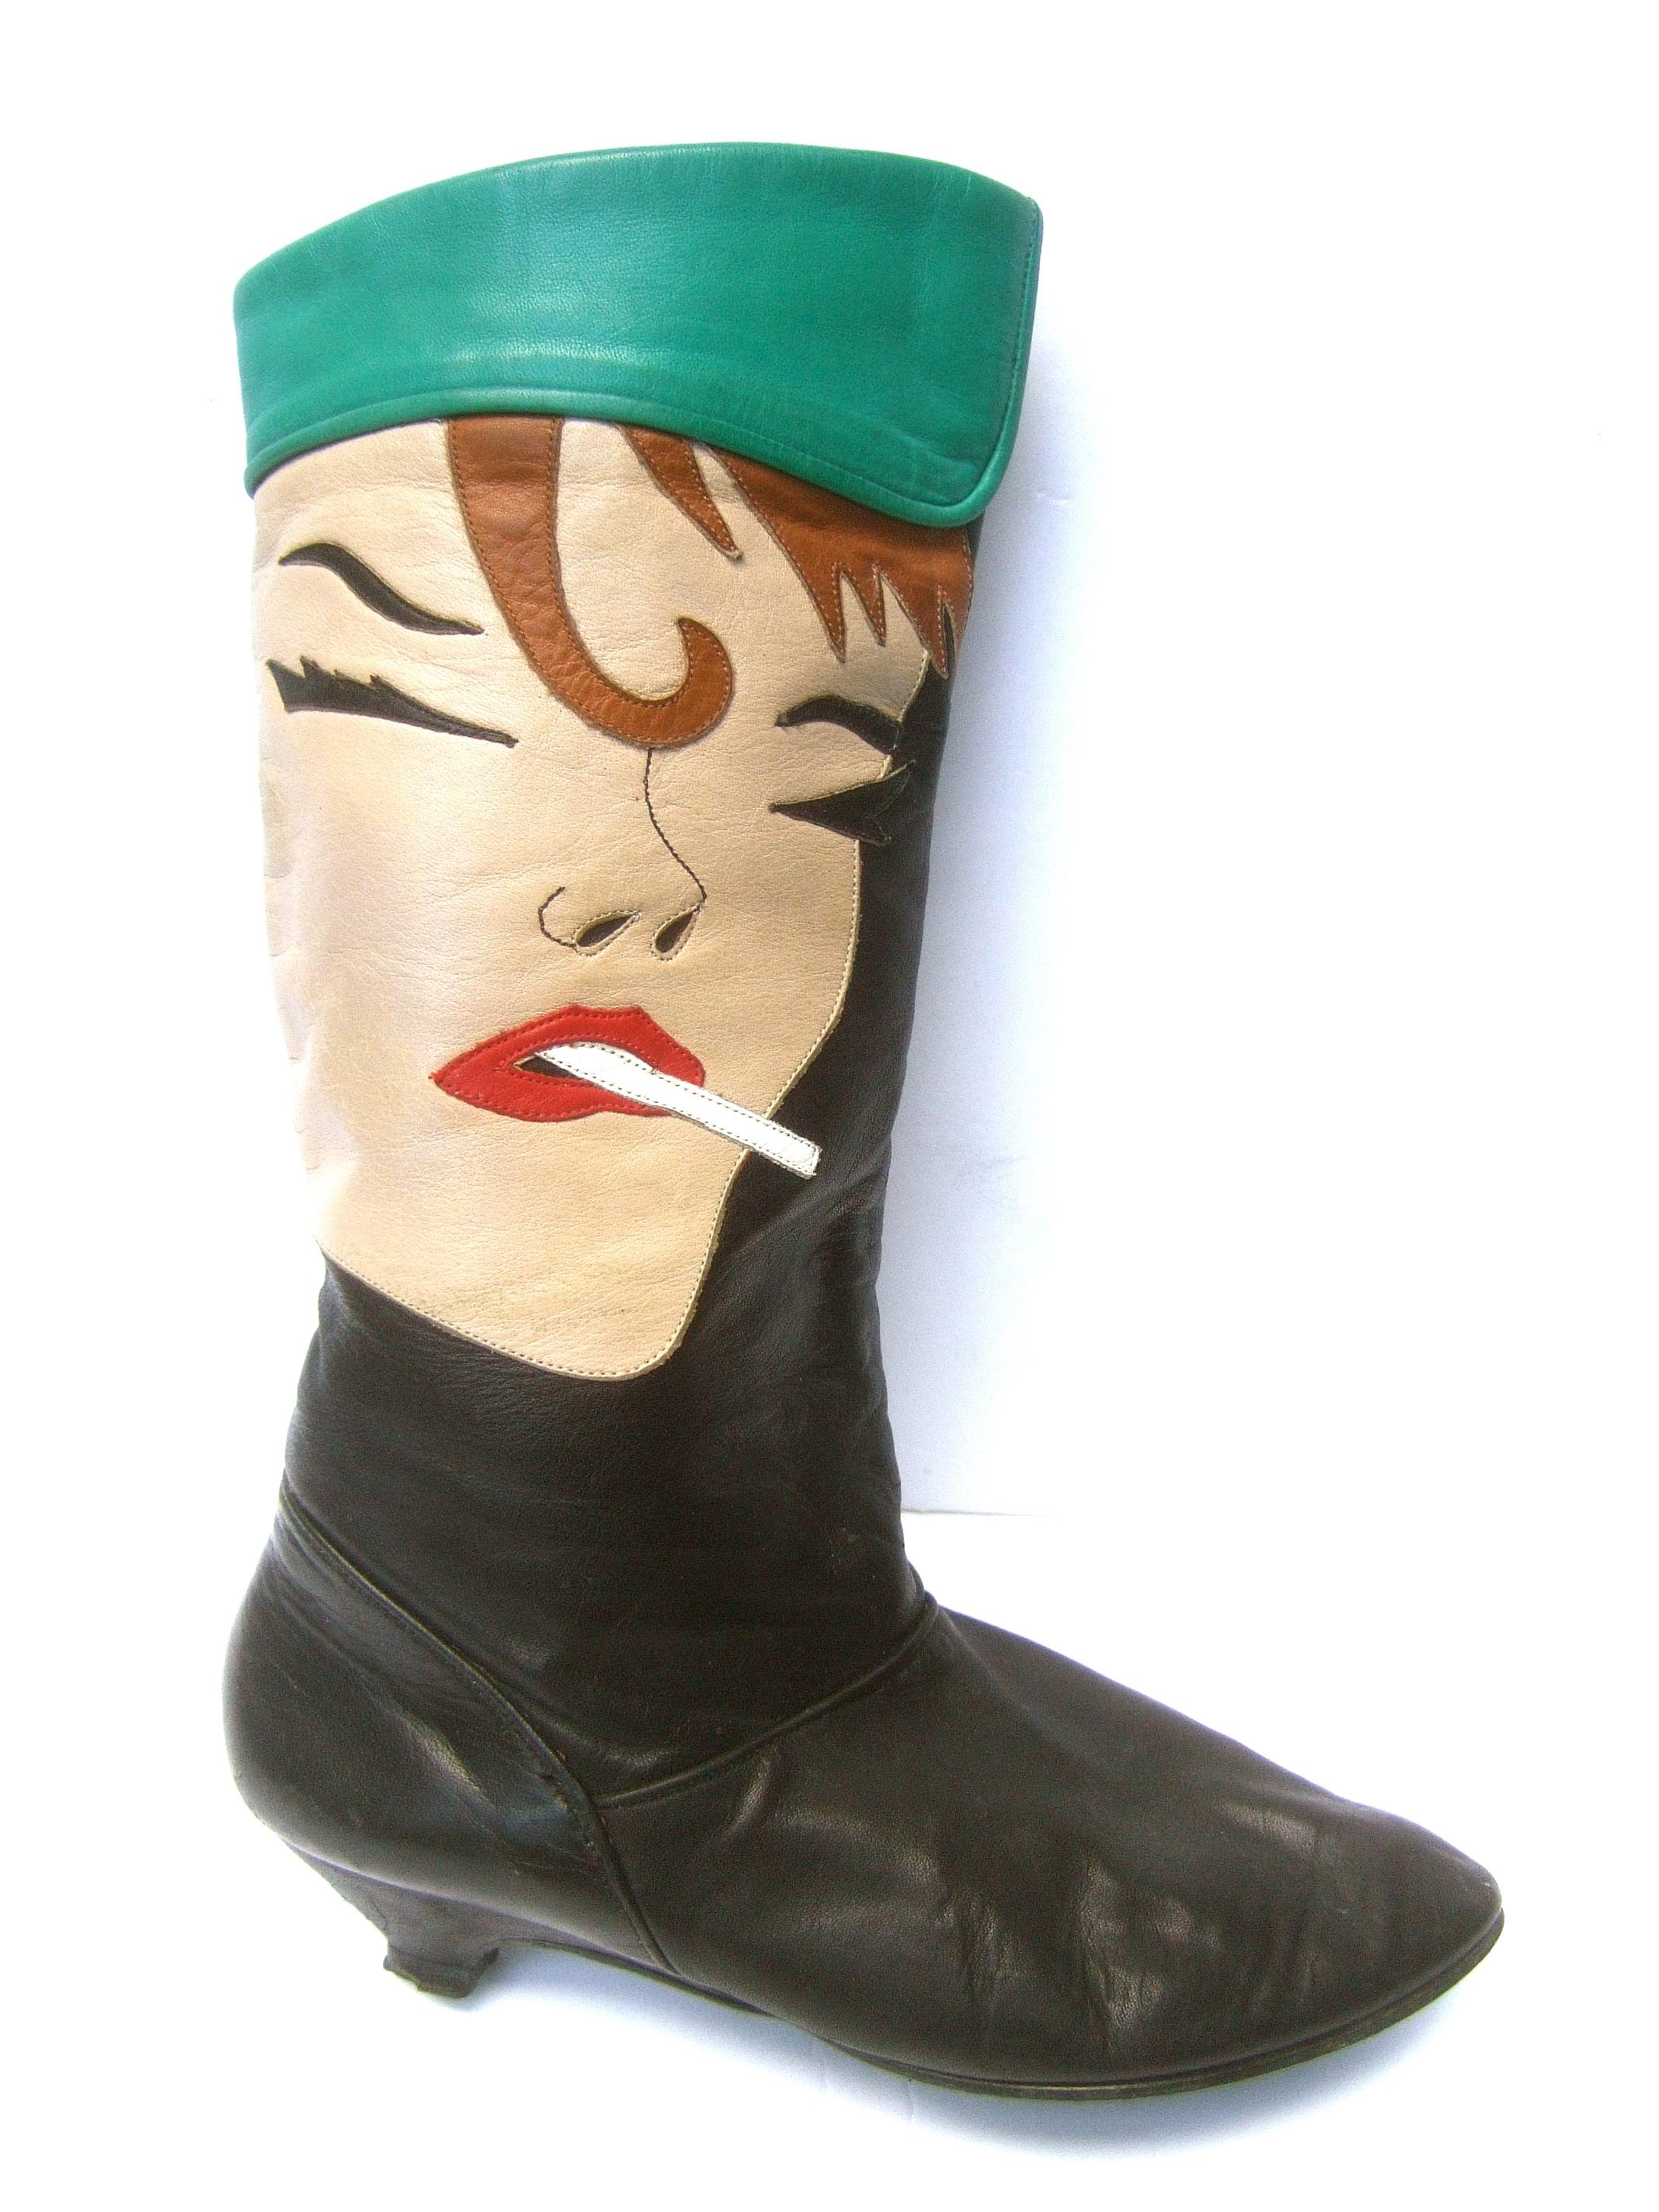 Mod Edgy Pop Art Leather Boots Designed by Zalo c 1980s 12